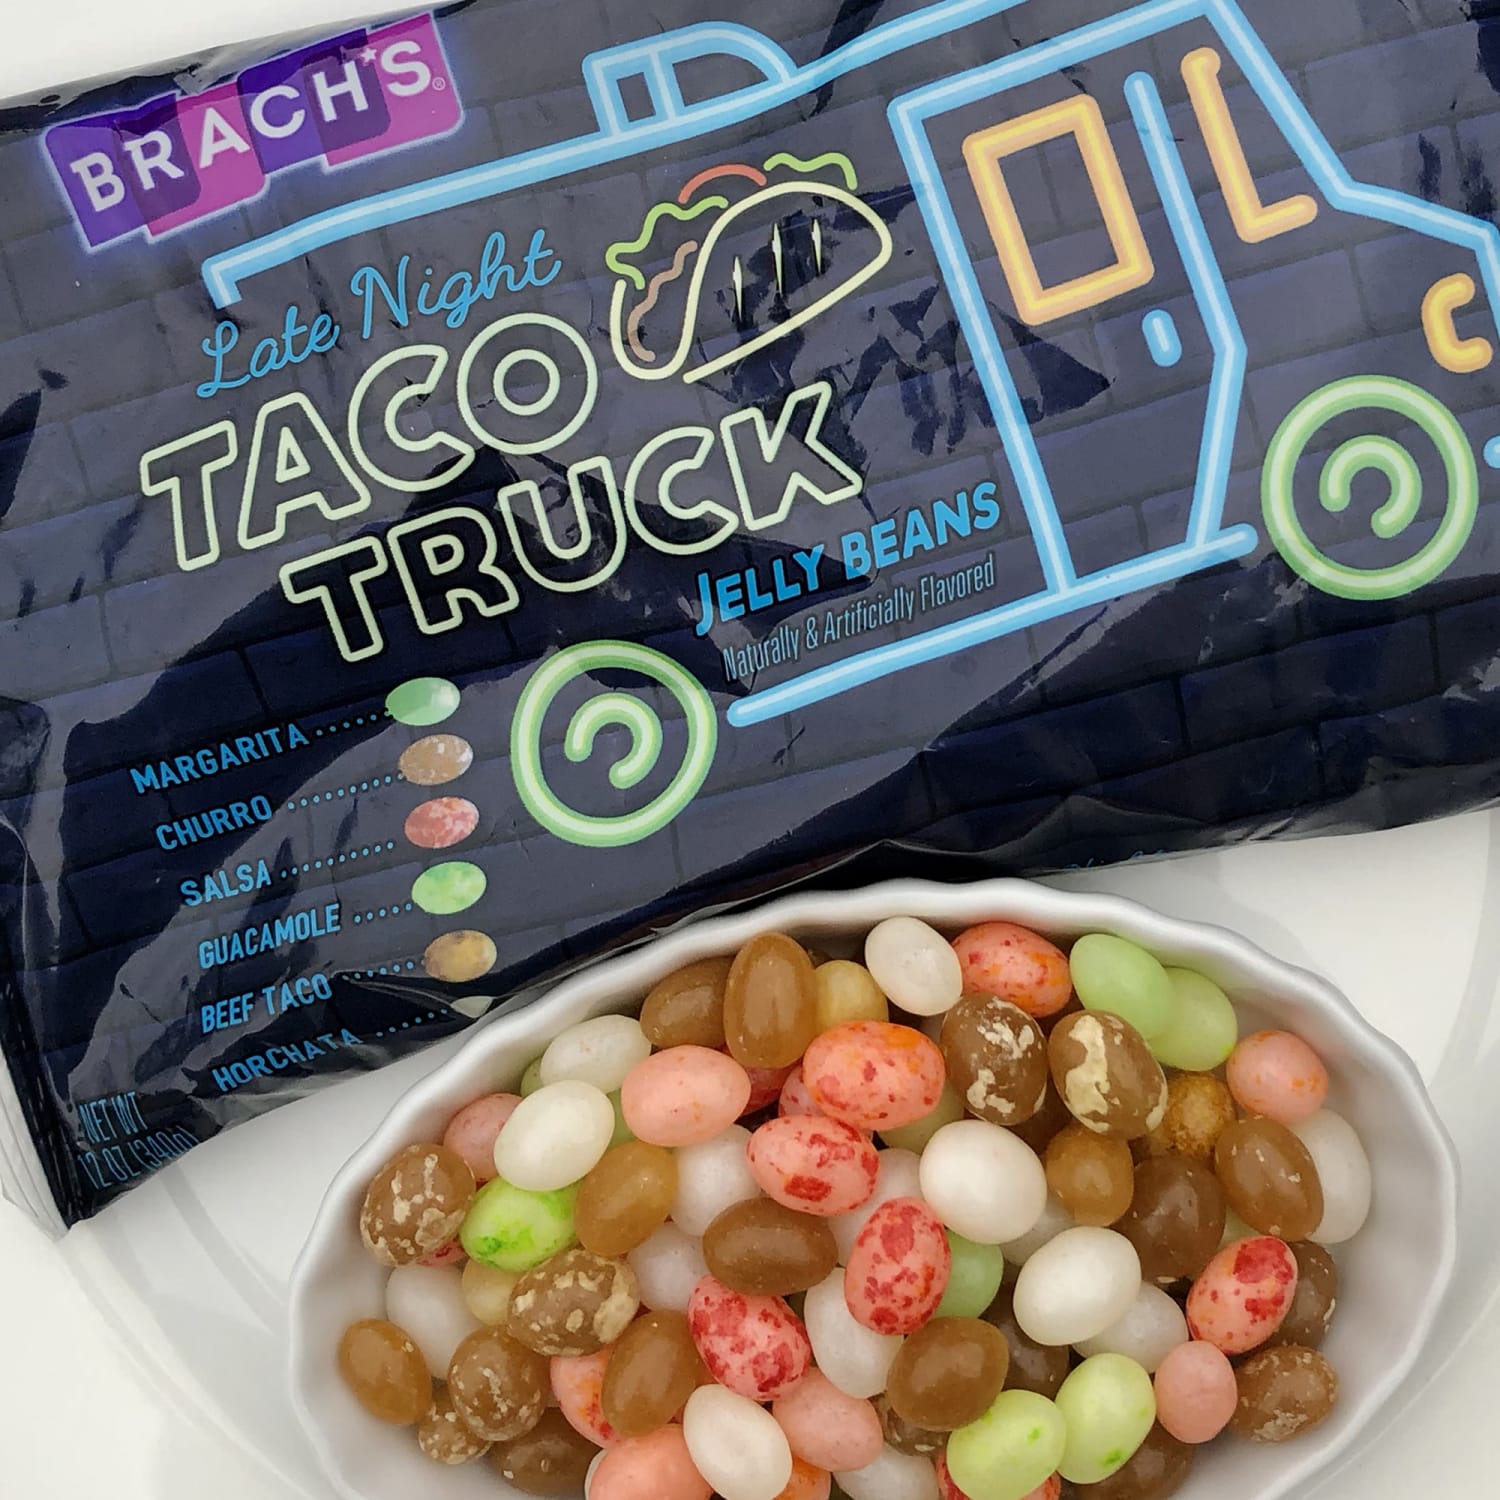 Brach's Releases Late Night Taco Truck Jelly Beans: Taste Test